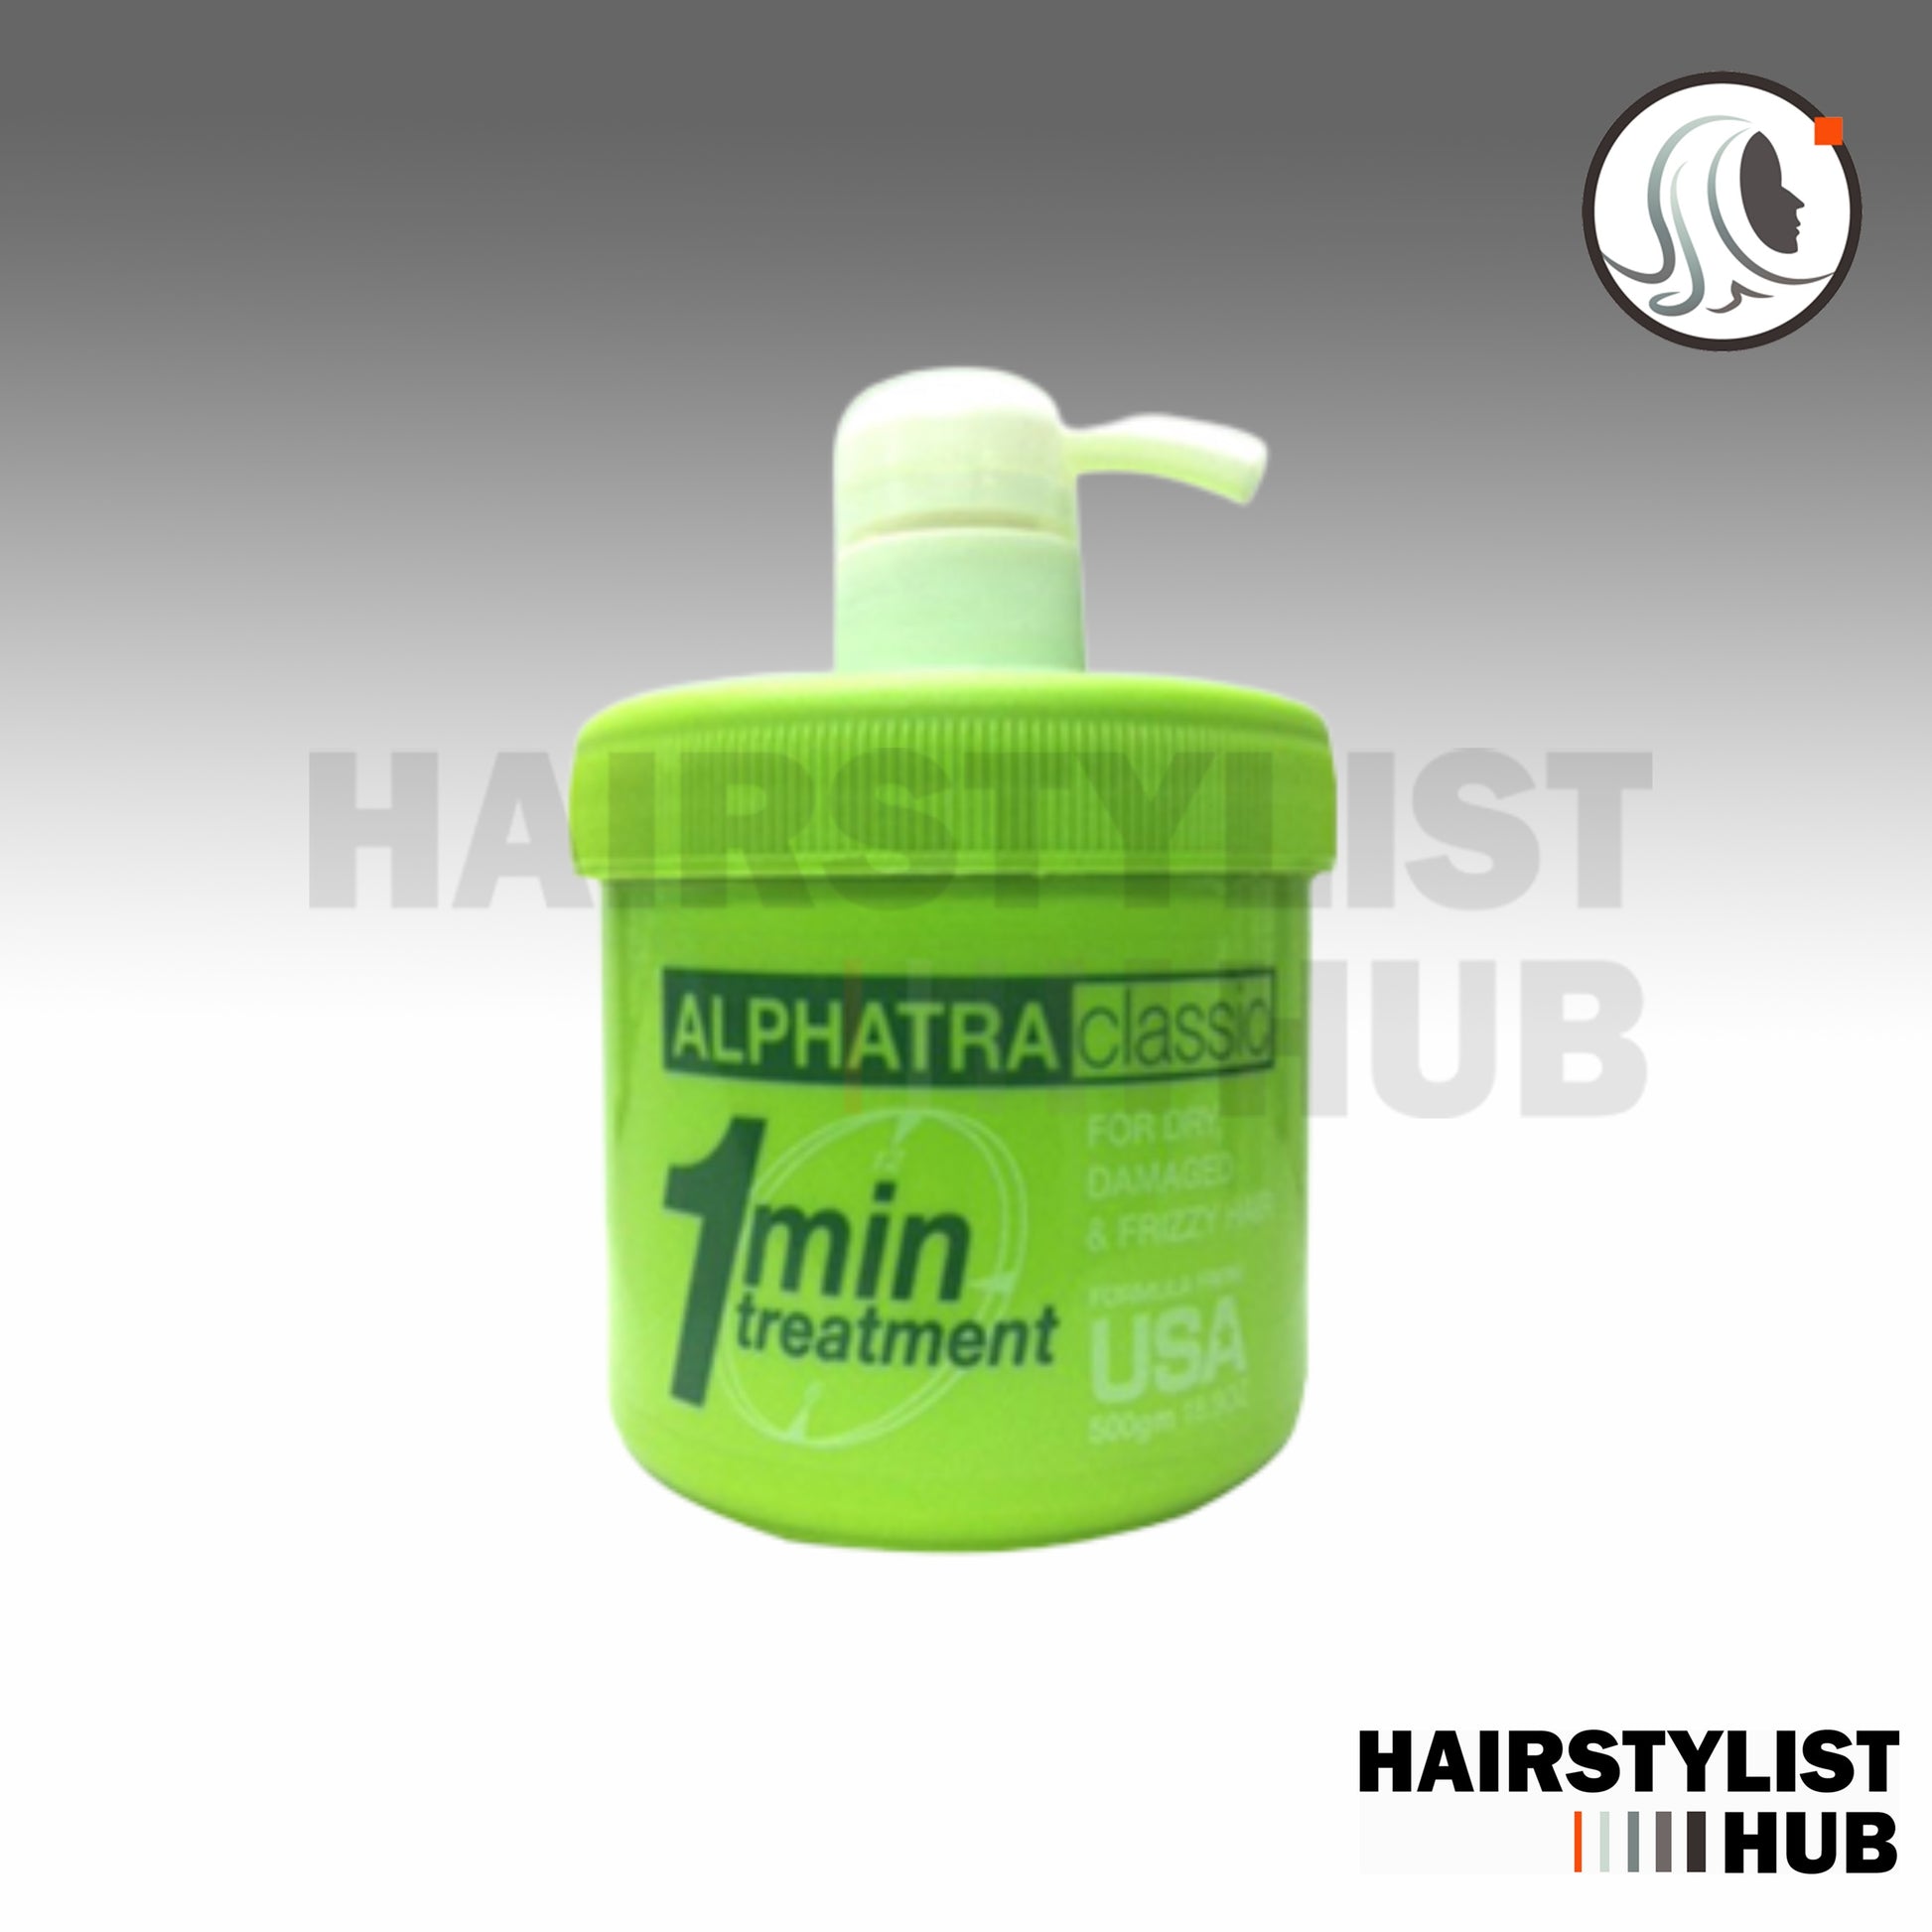 Green container of ALPHATRA Classic 1 Minute Treatment for dry, damaged, and frizzy hair, with a pump dispenser